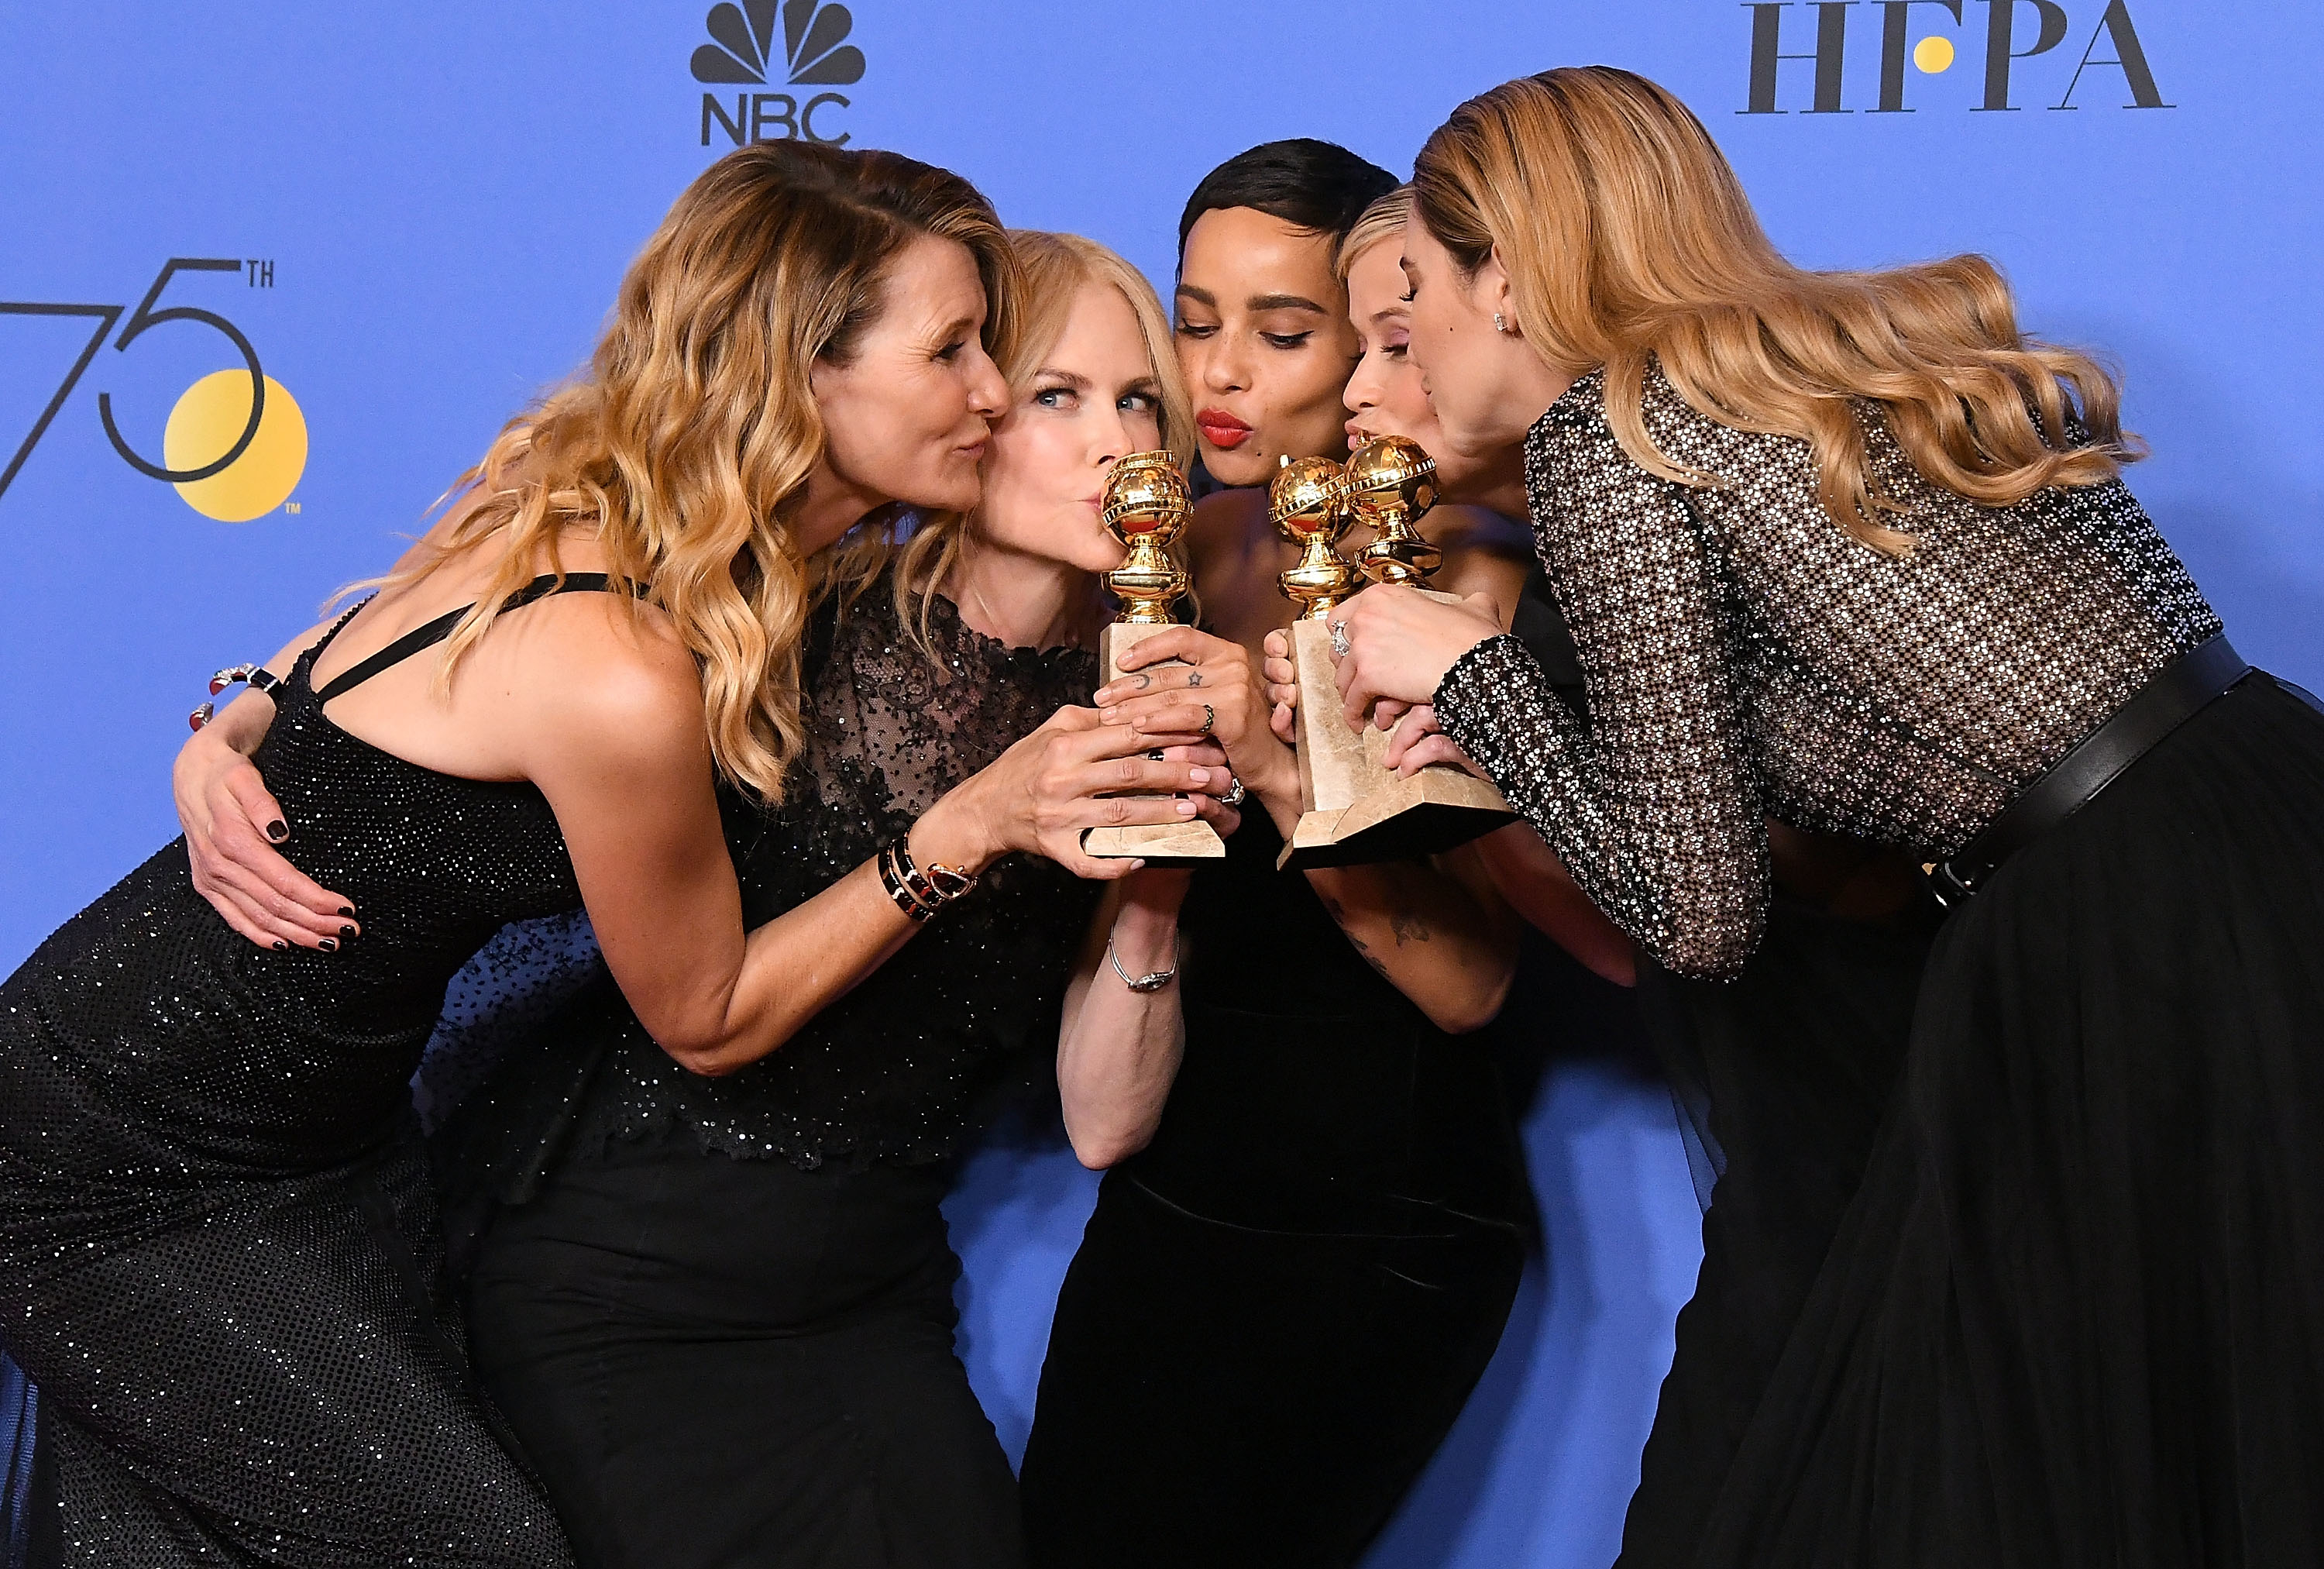 The cast kissing their  Golden Globe awards backstage